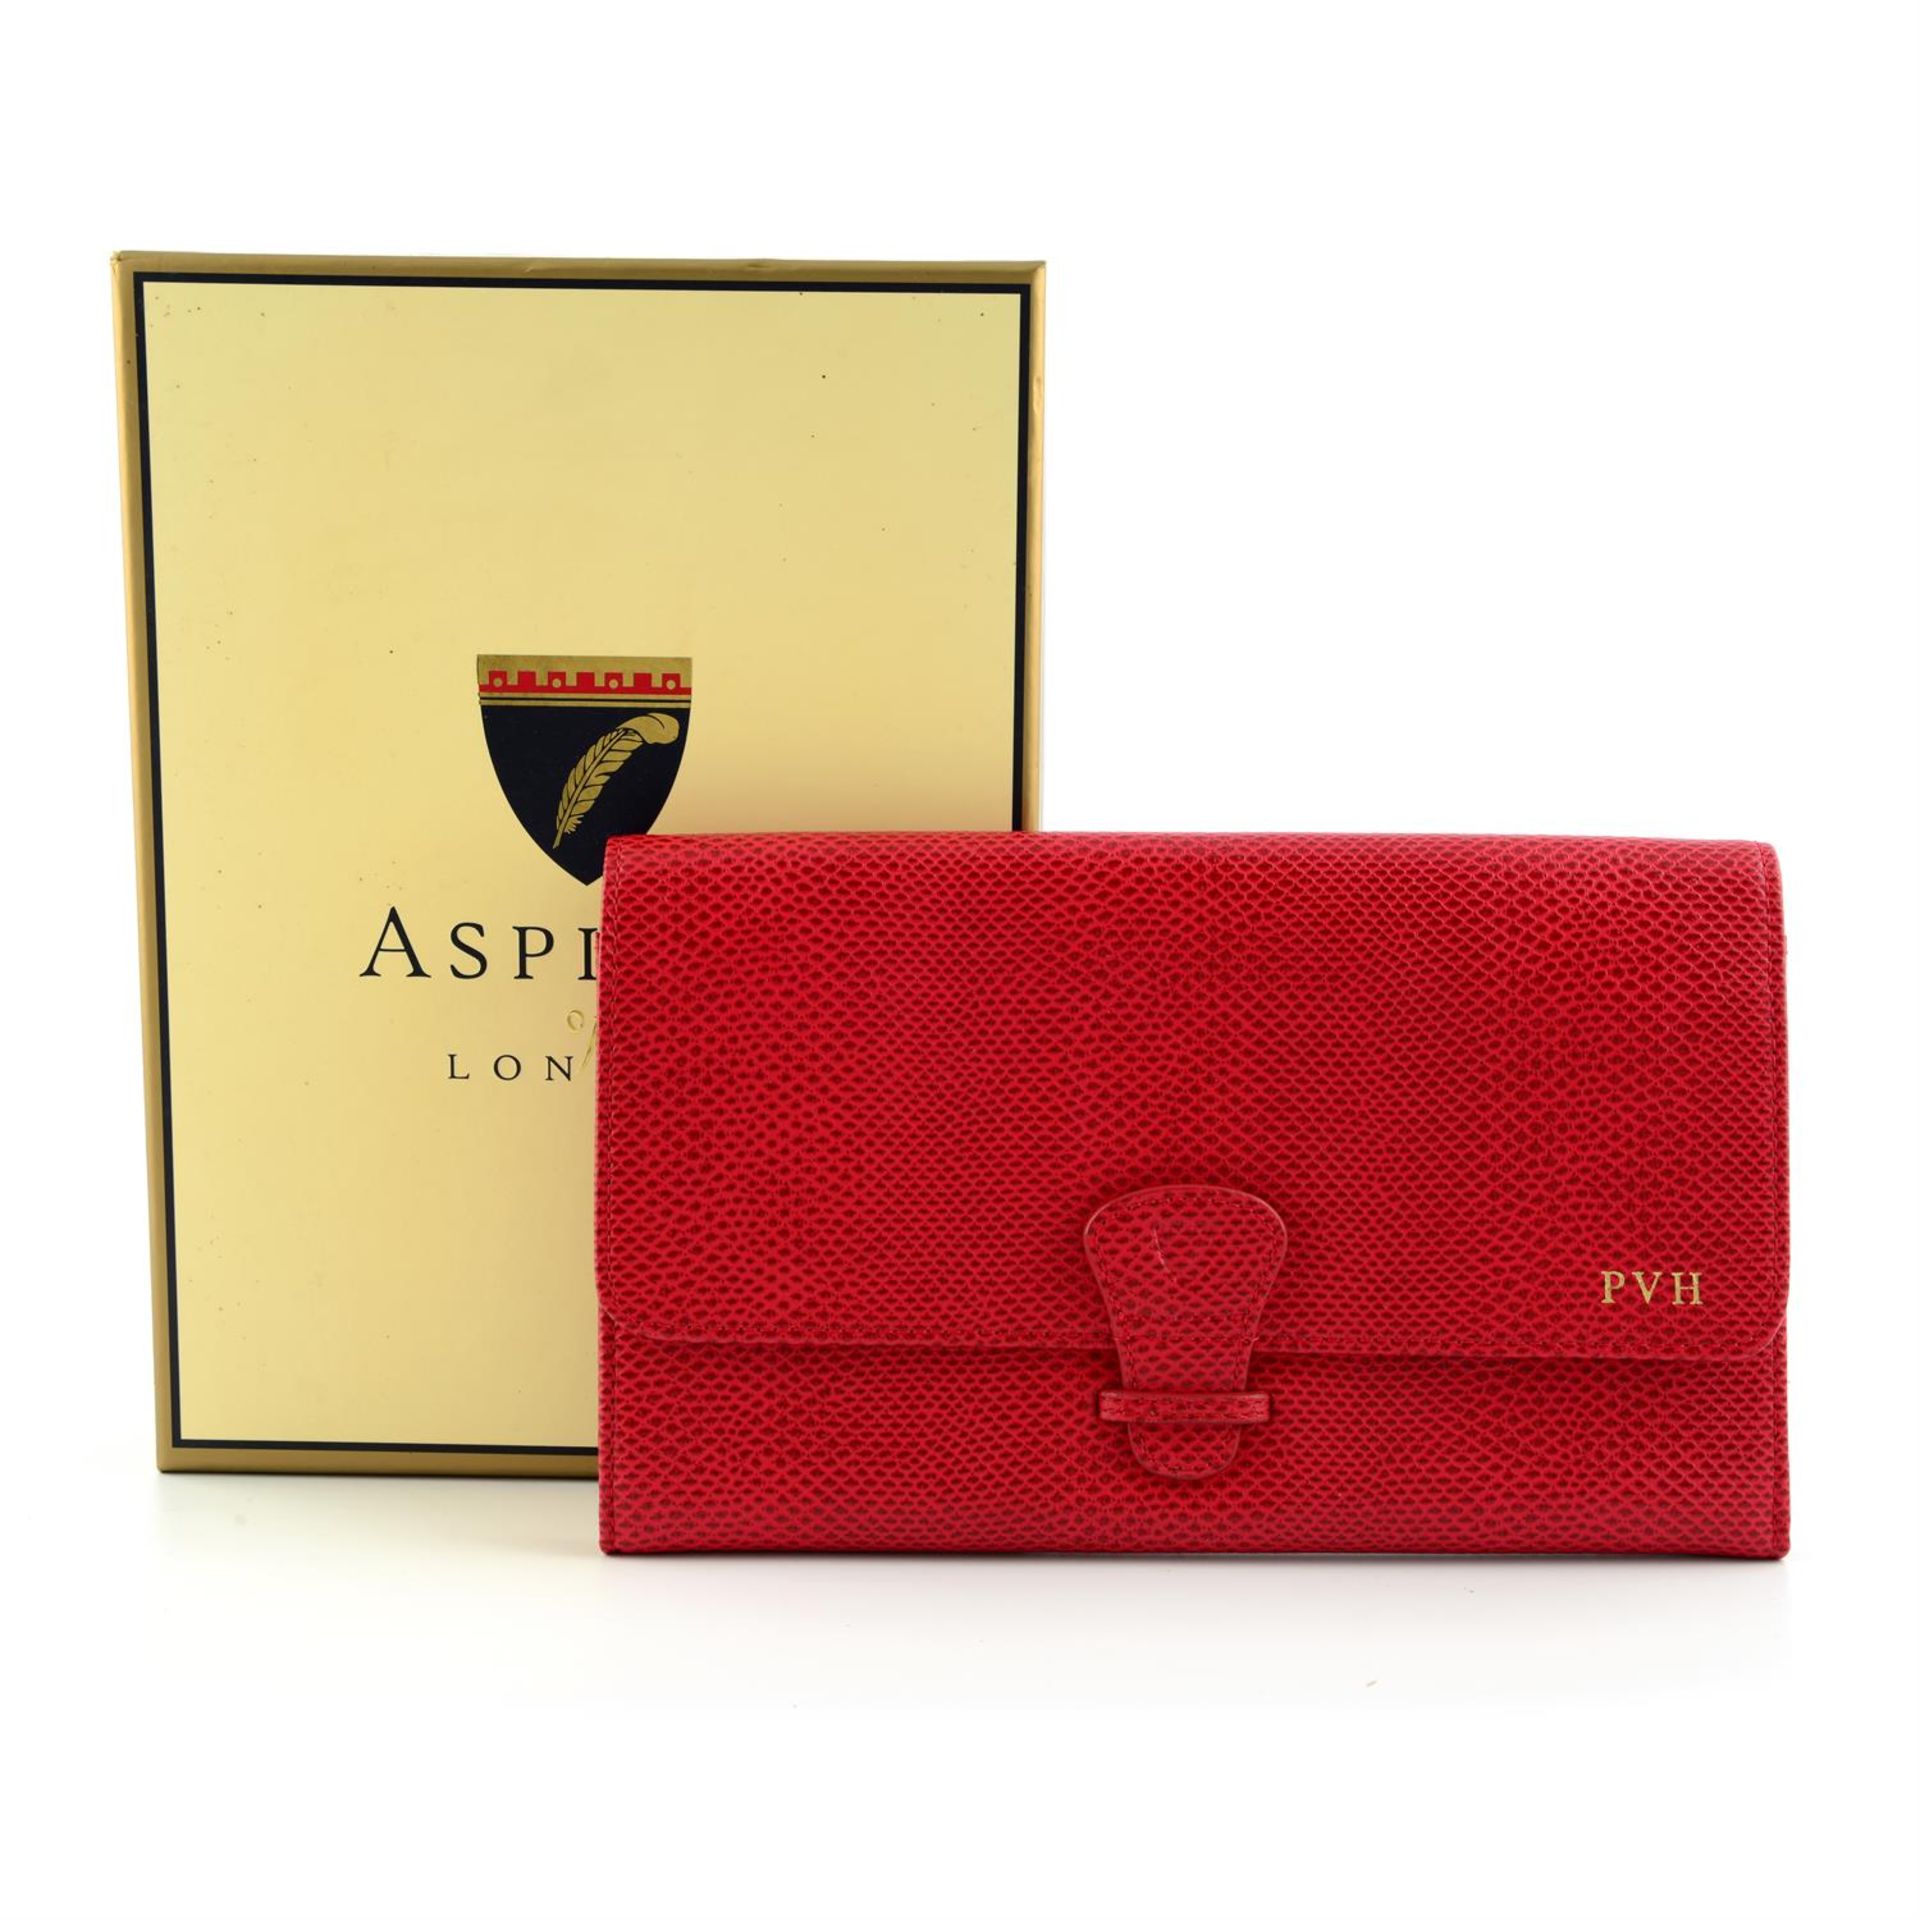 ASPINAL OF LONDON - a red embossed leather document holder.